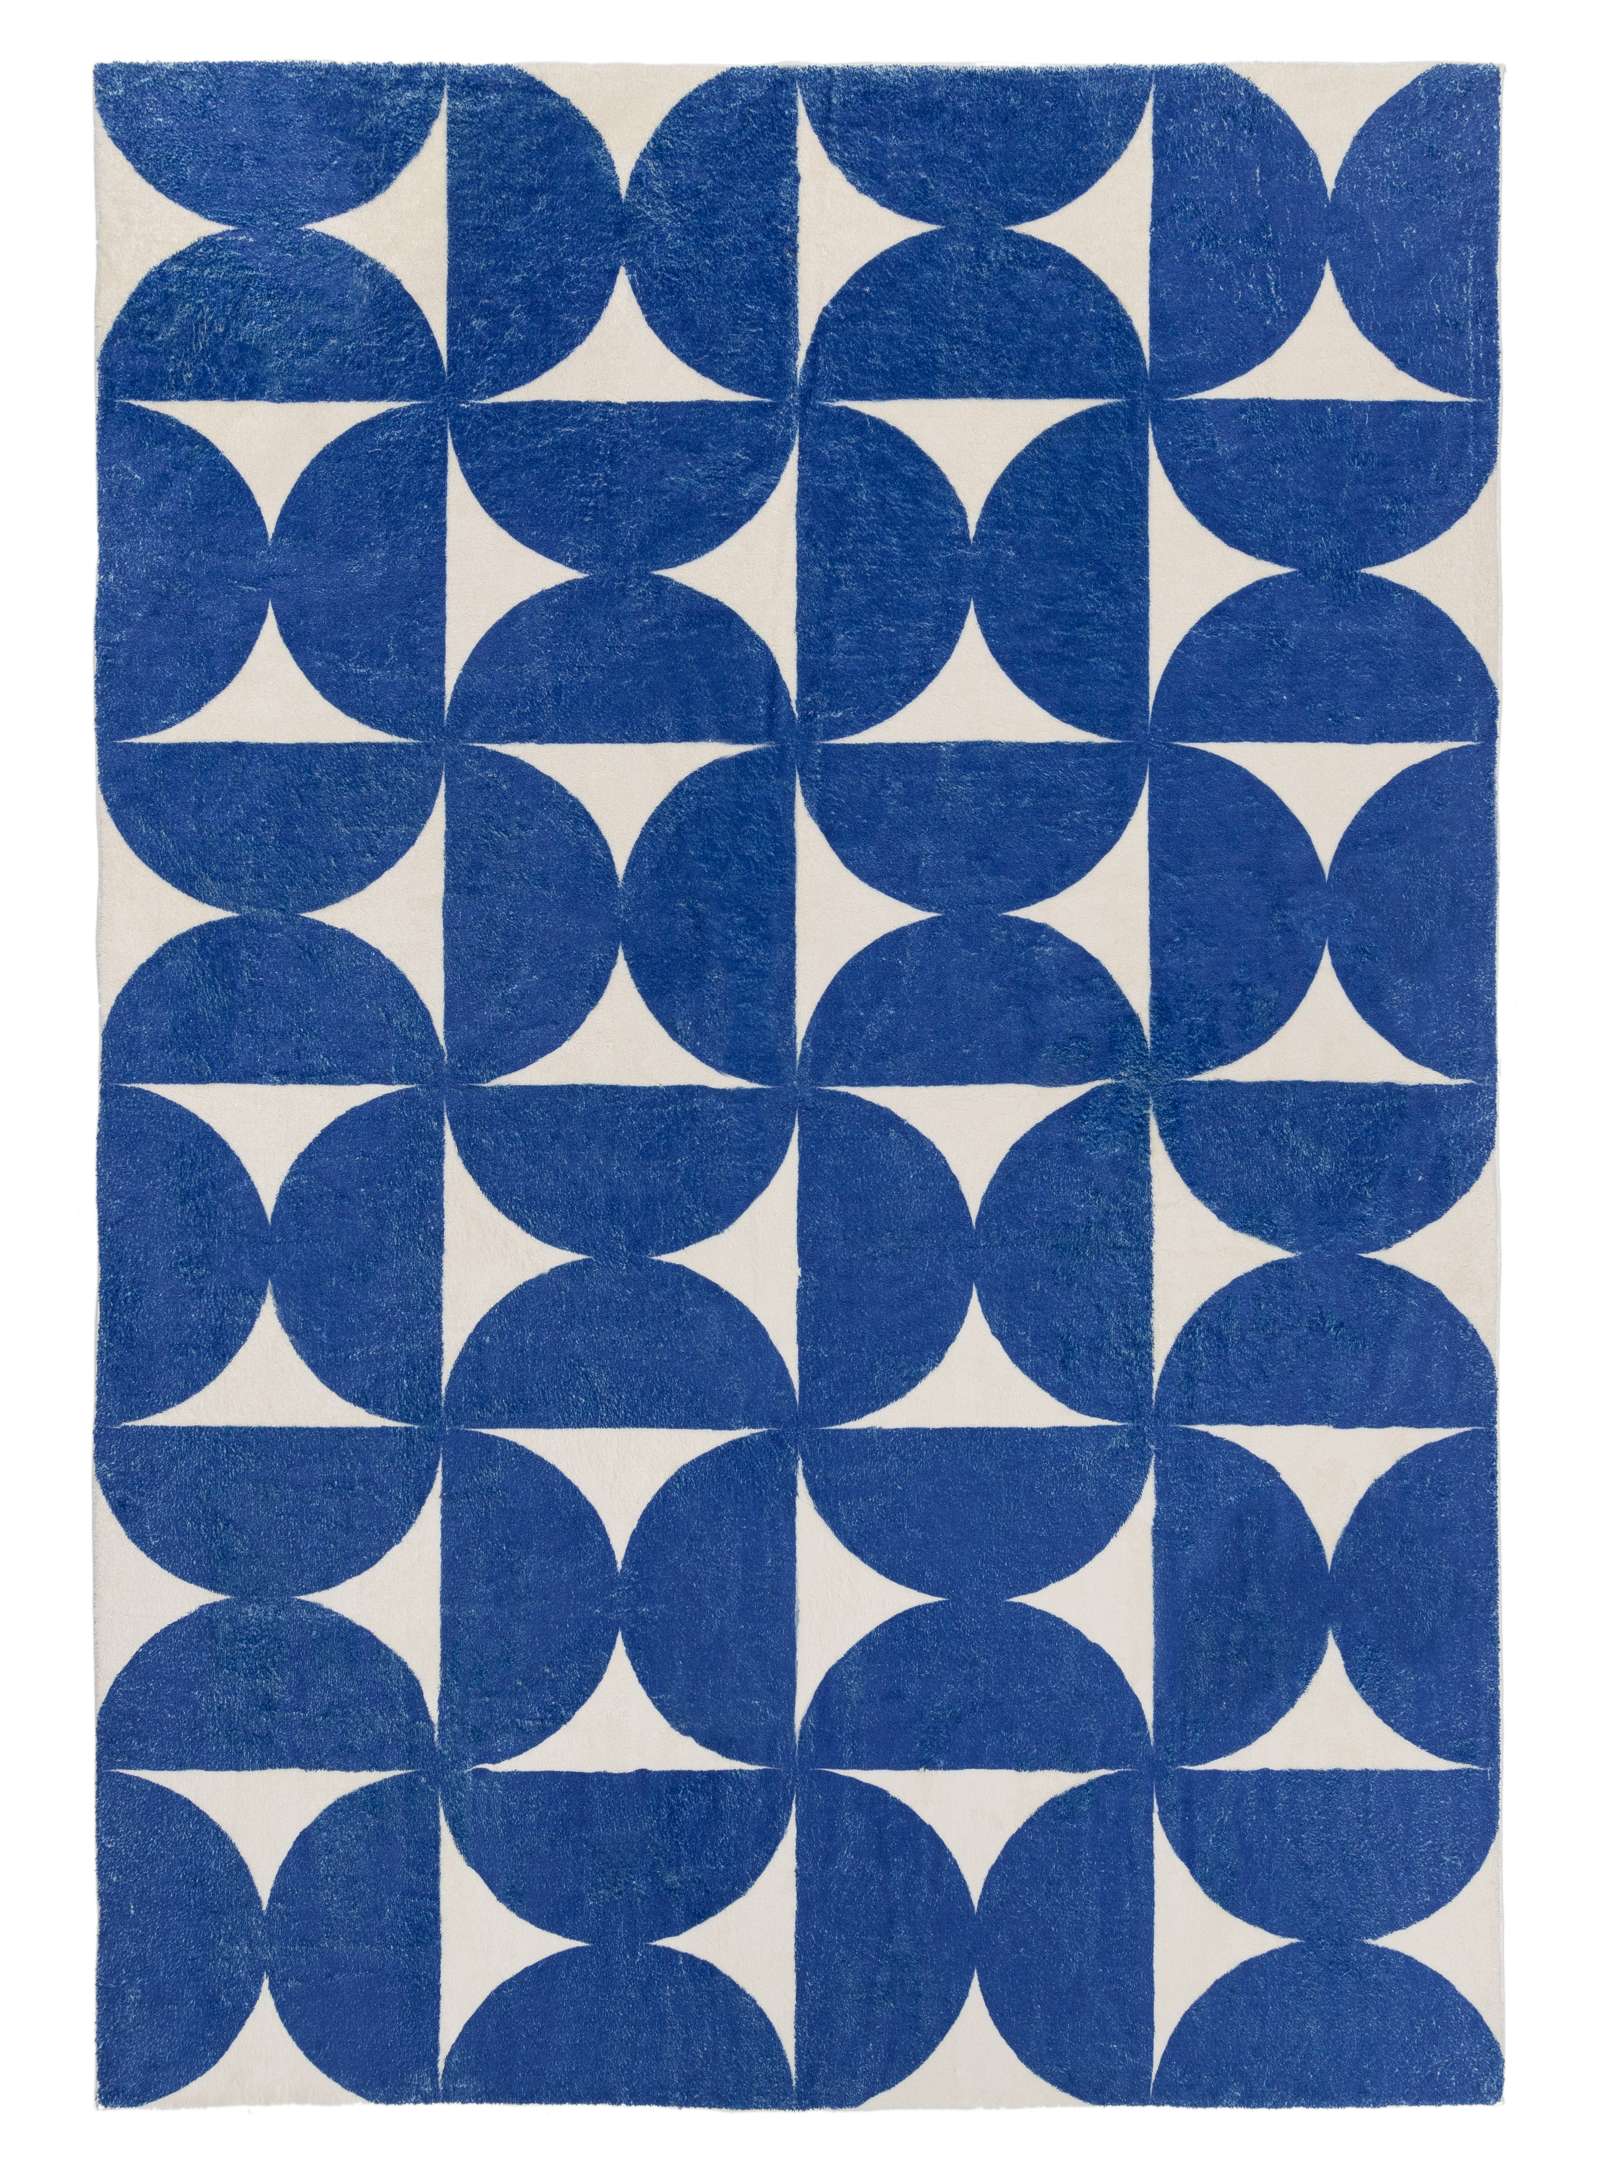 Loopsie RUGS 180cm x 120cm Tosa Blue and Ivory Geometric Washable Rug